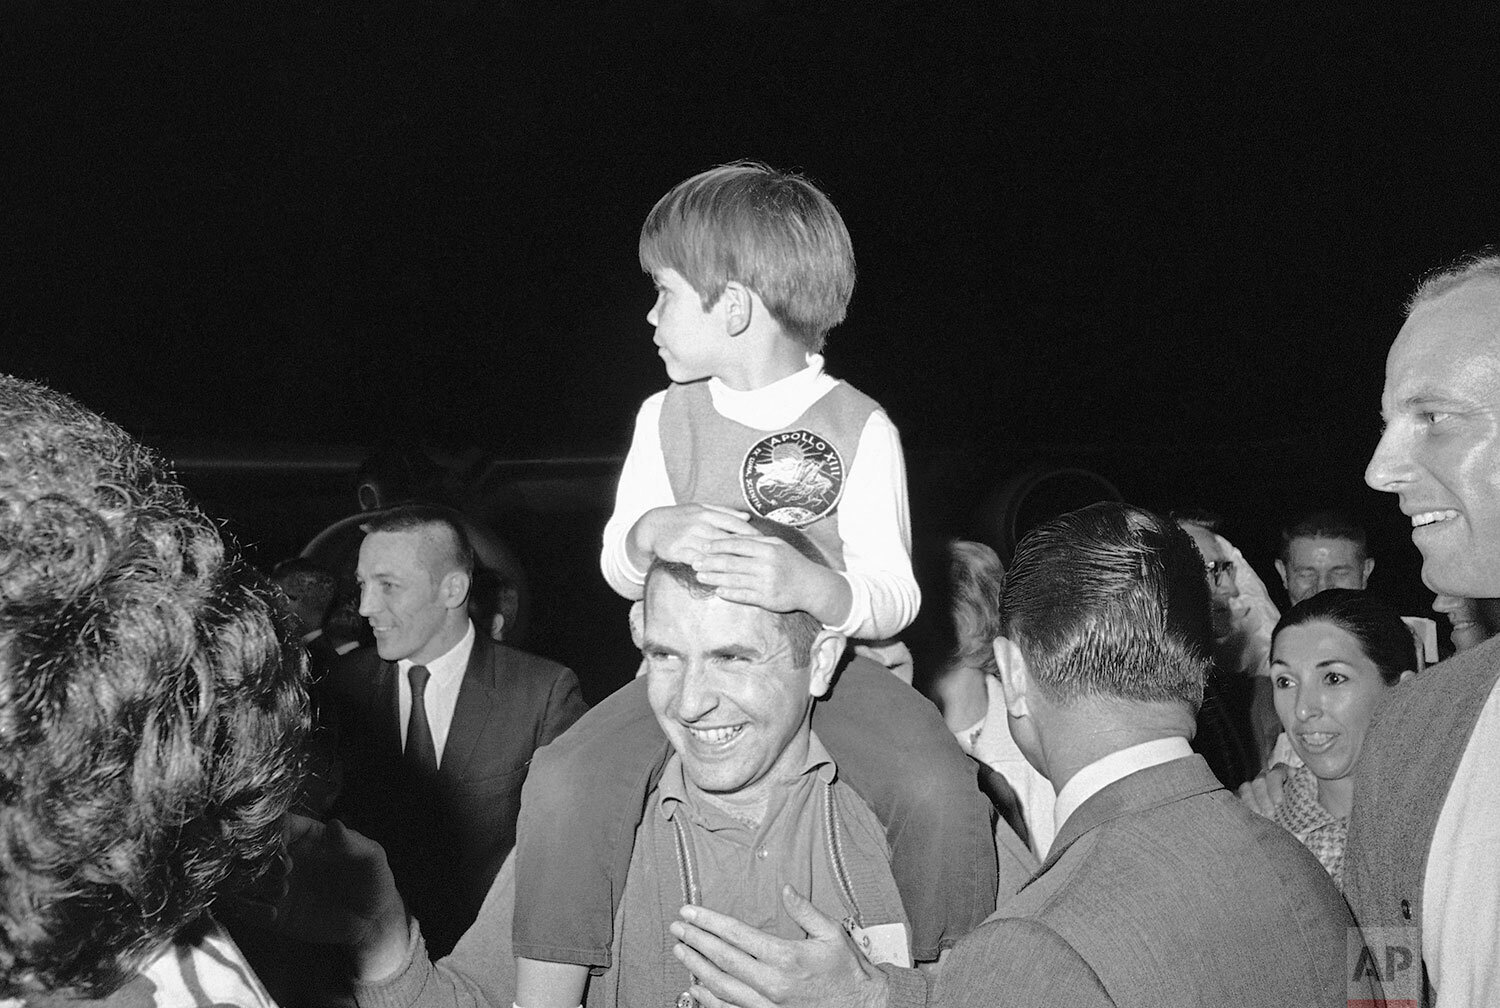  Apollo 13 Astronaut James Lovell Jr., holds his son, Jeff Lovell, 4, as he arrived back to Ellington Air Force Base, April 19, 1970, Houston, Tex. (AP Photo) 